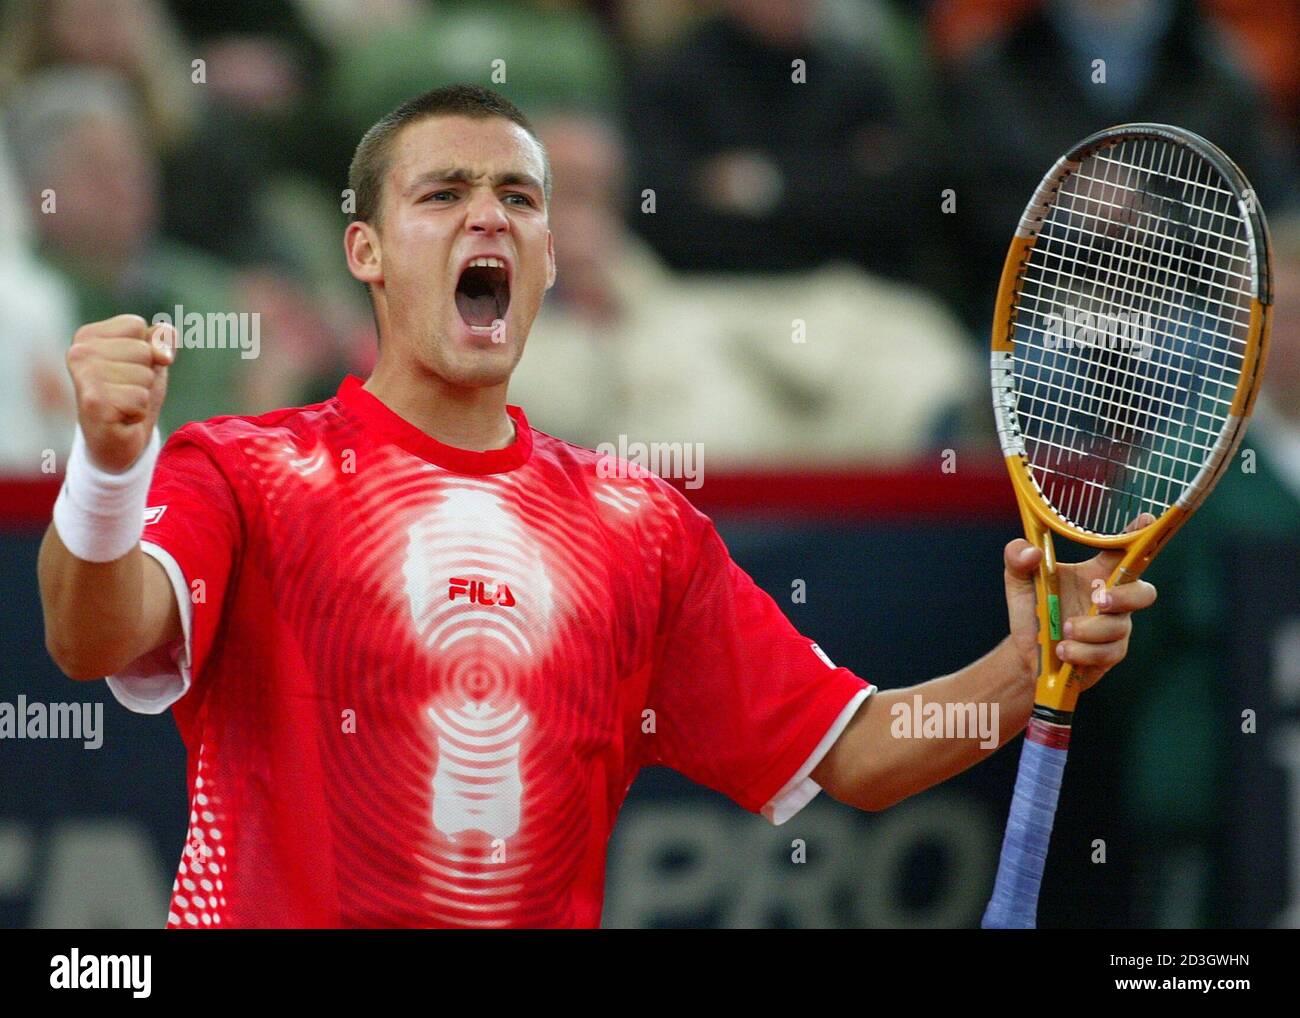 Mikhail Youzhny of Russia celebrates his victory against Florian Mayer from  Germany during the Hamburg Masters Tennis tournament May 13, 2004. Youzhny  won the match 6-0 7-6 and reached the quarter-final. REUTERS/Tobias